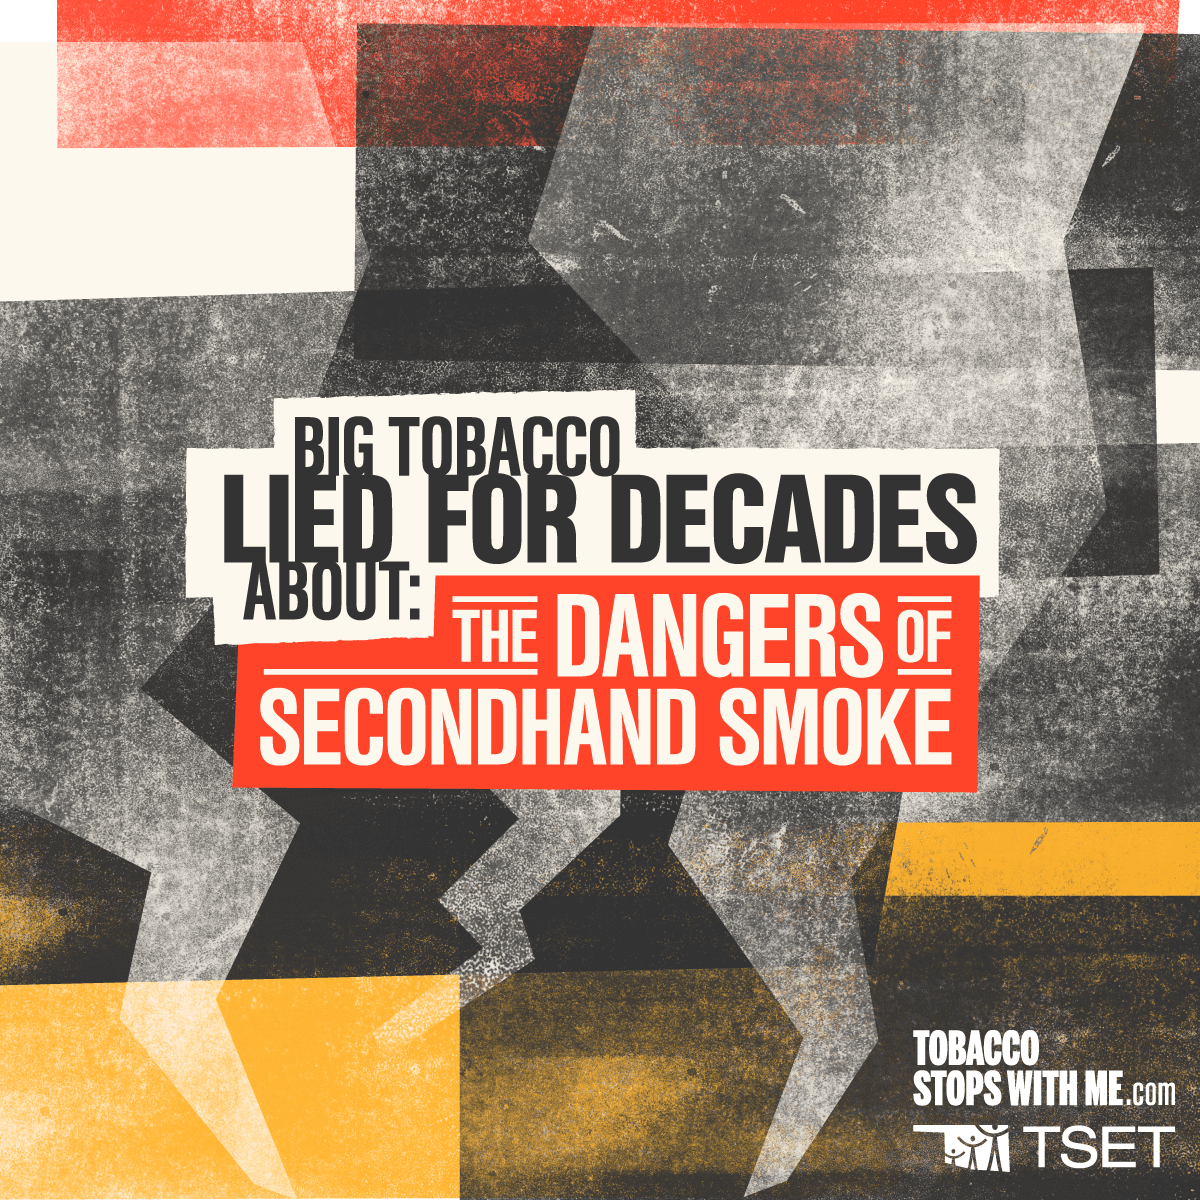 Big tobacco lied for decades about the dangers of secondhand smoke